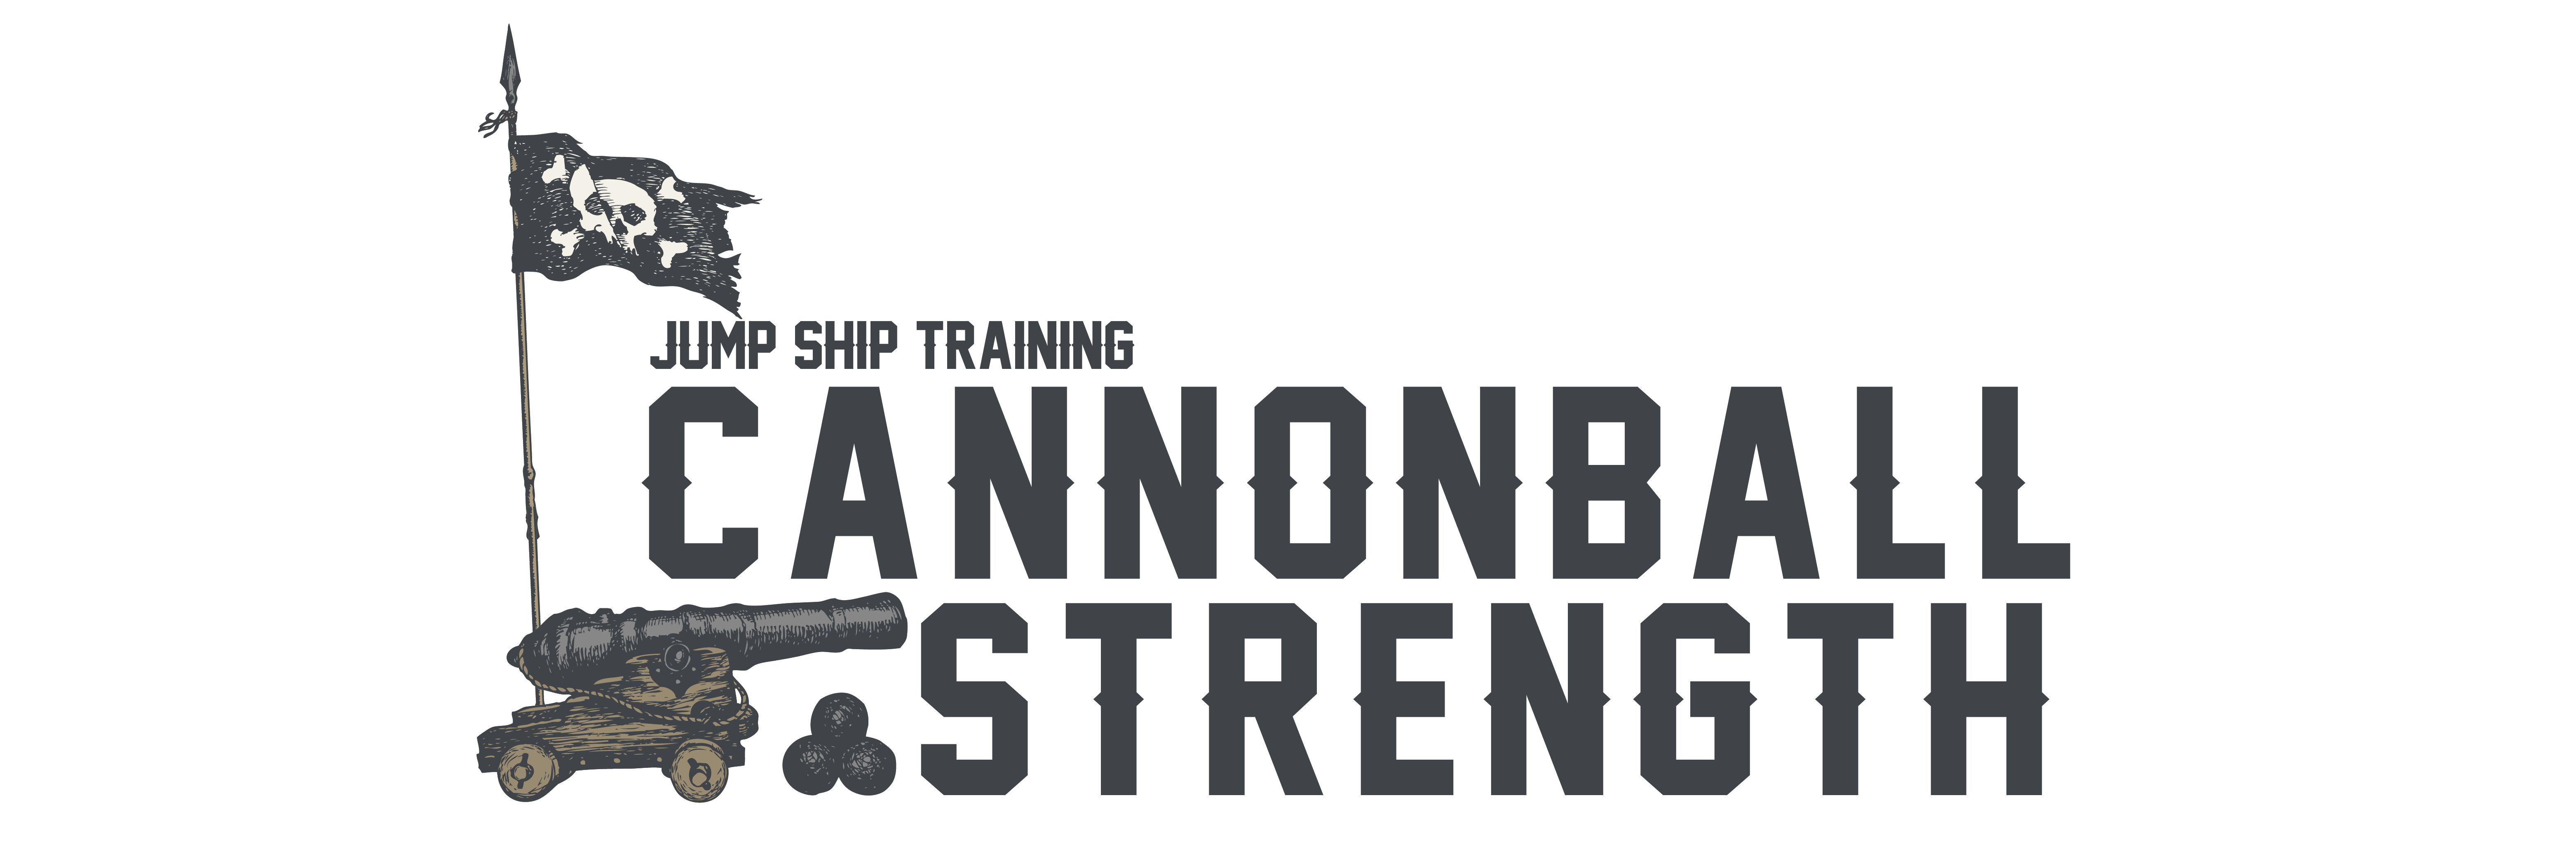 Cannonball Strength - WL Pulls & Complexes